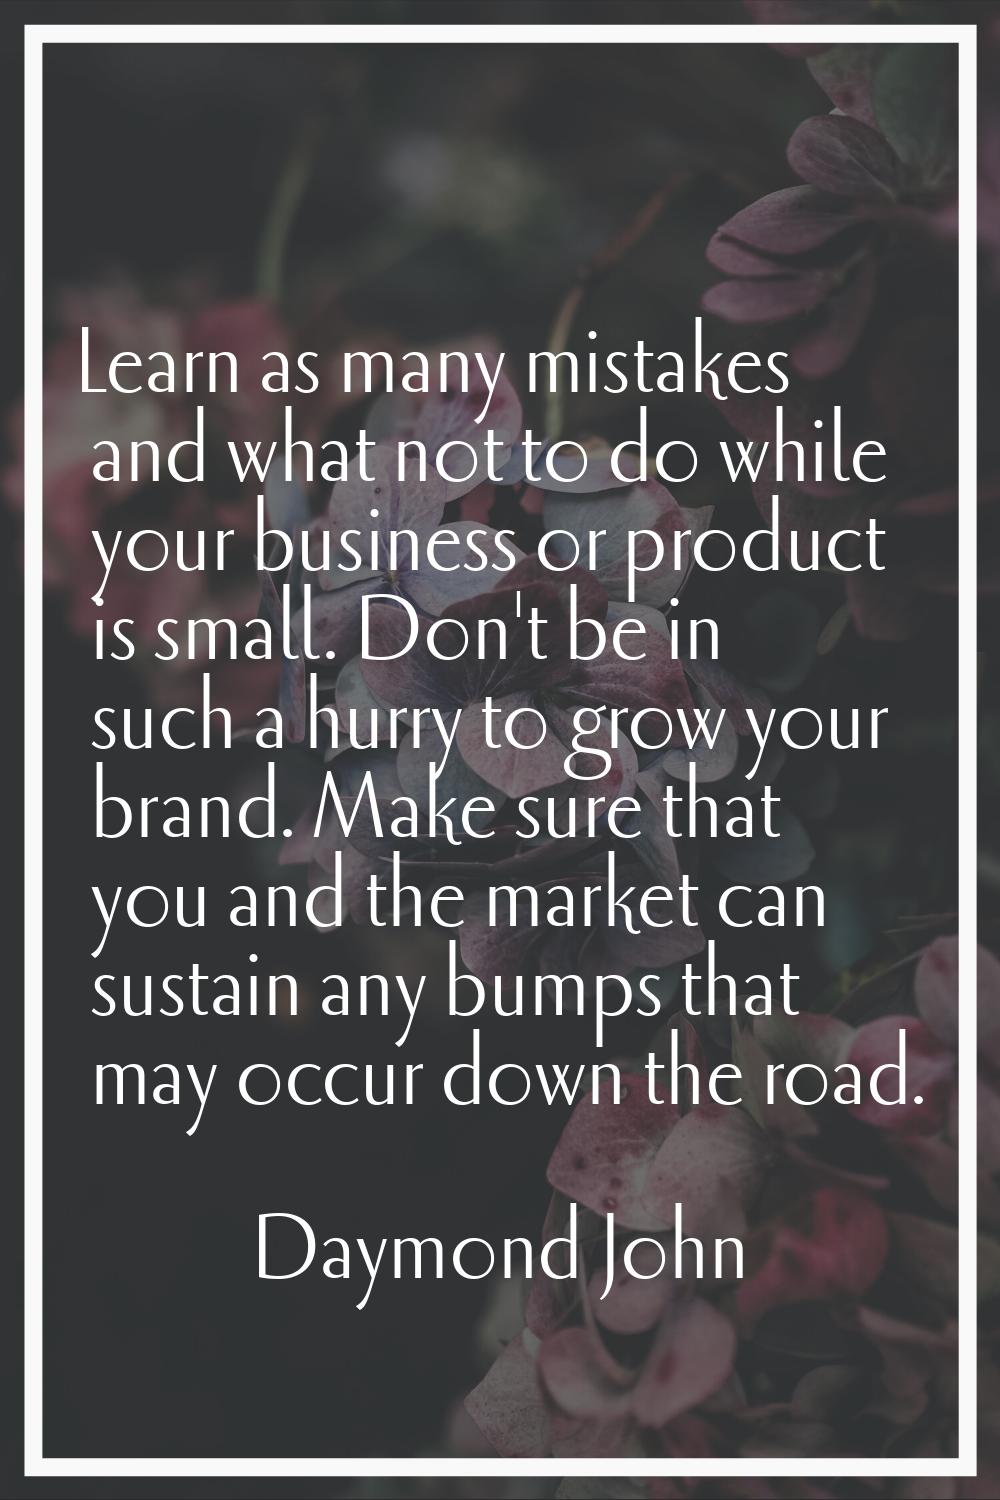 Learn as many mistakes and what not to do while your business or product is small. Don't be in such